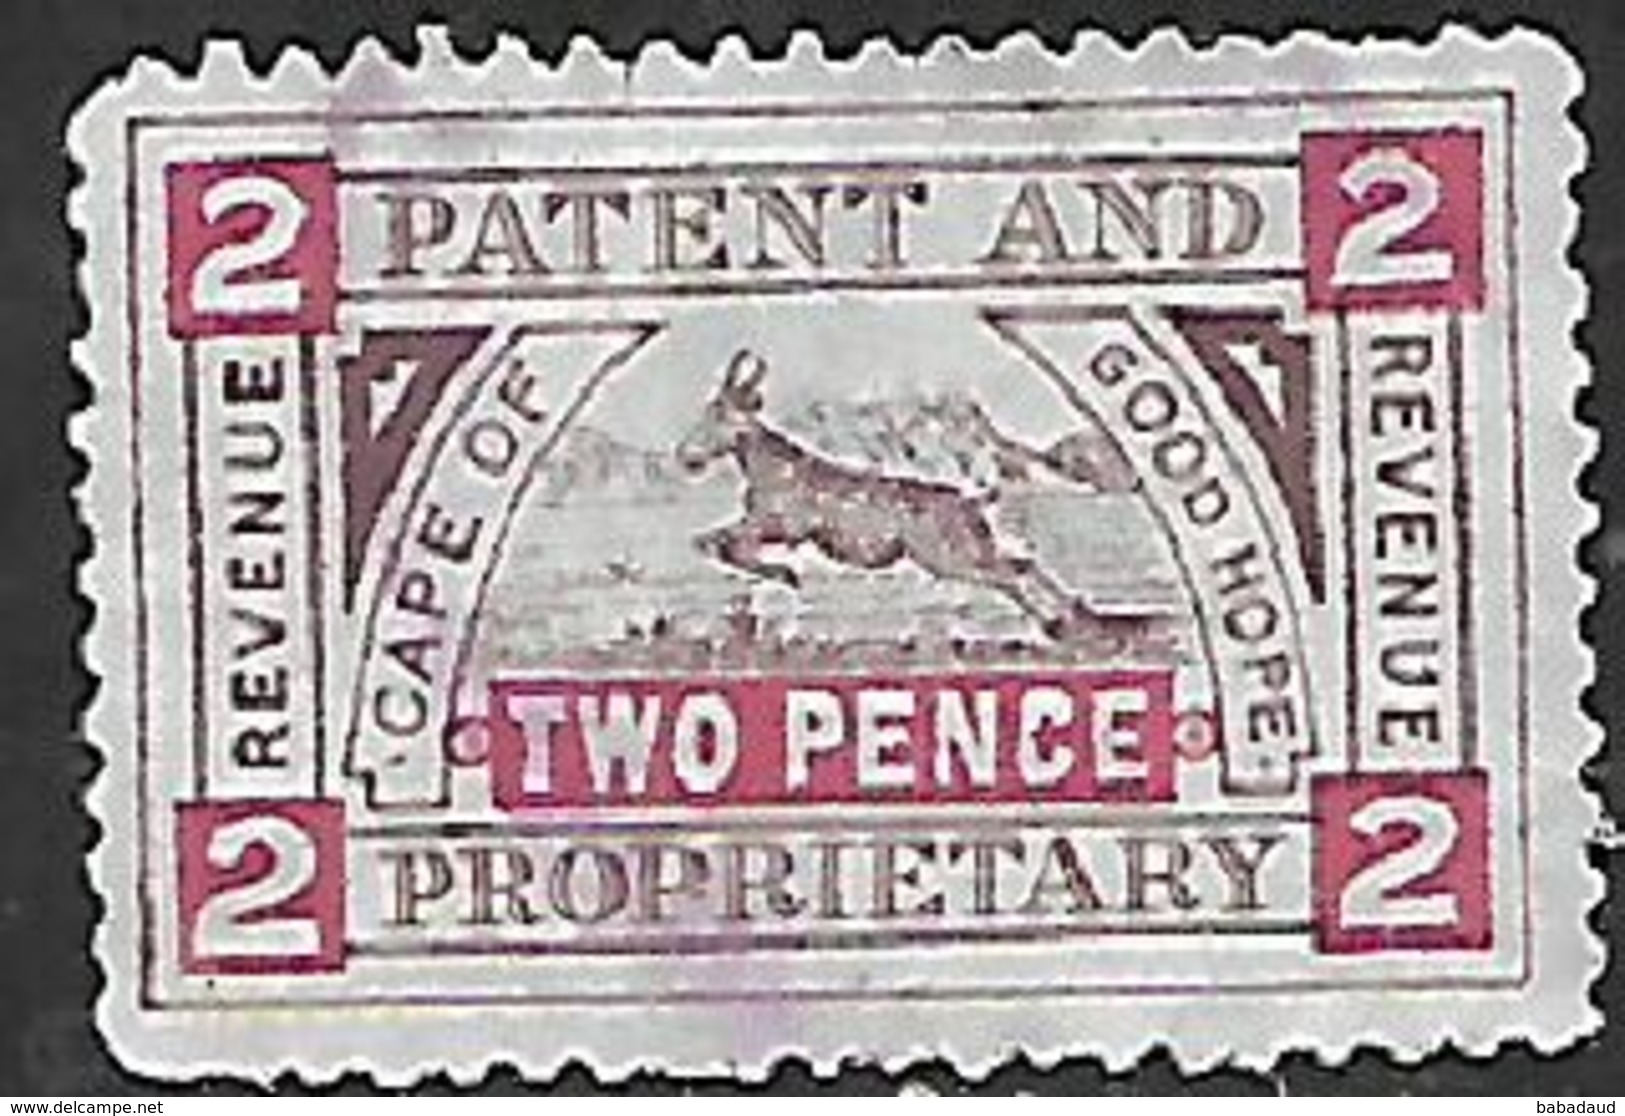 South Africa, CoGH, 1909, PATENT & PROPRIETARY, 2d, Revenue, Perf 11.5  Used - Cape Of Good Hope (1853-1904)